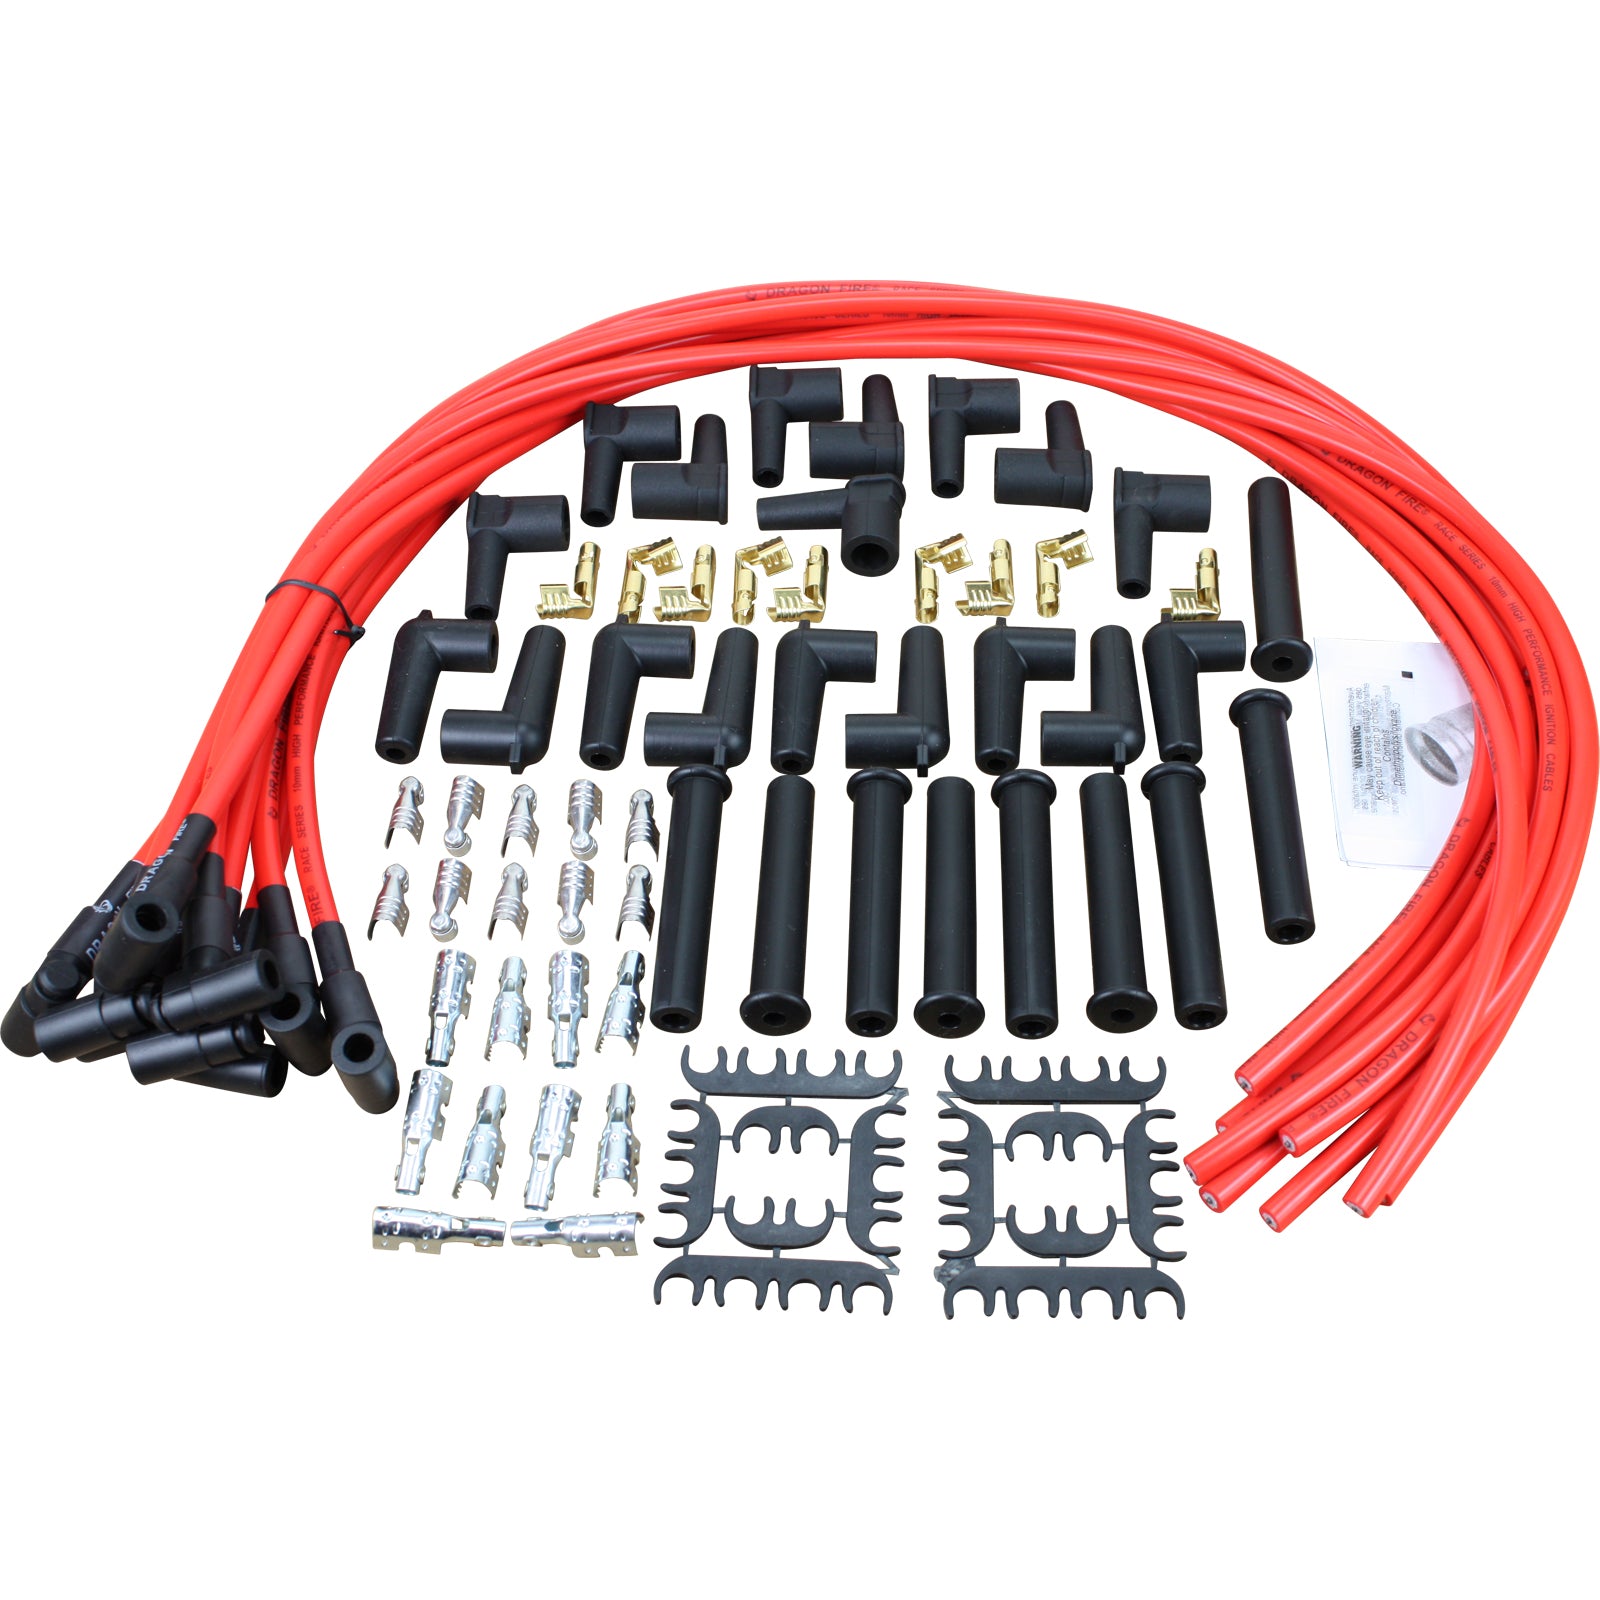 Dragon Fire Race Series High Performance Cut To Length 10.2mm Spark Plug  Wire Set For HEI and Stock Points Distributor SBC BBC Ford Chevy GM Olds –  AIP Electronics